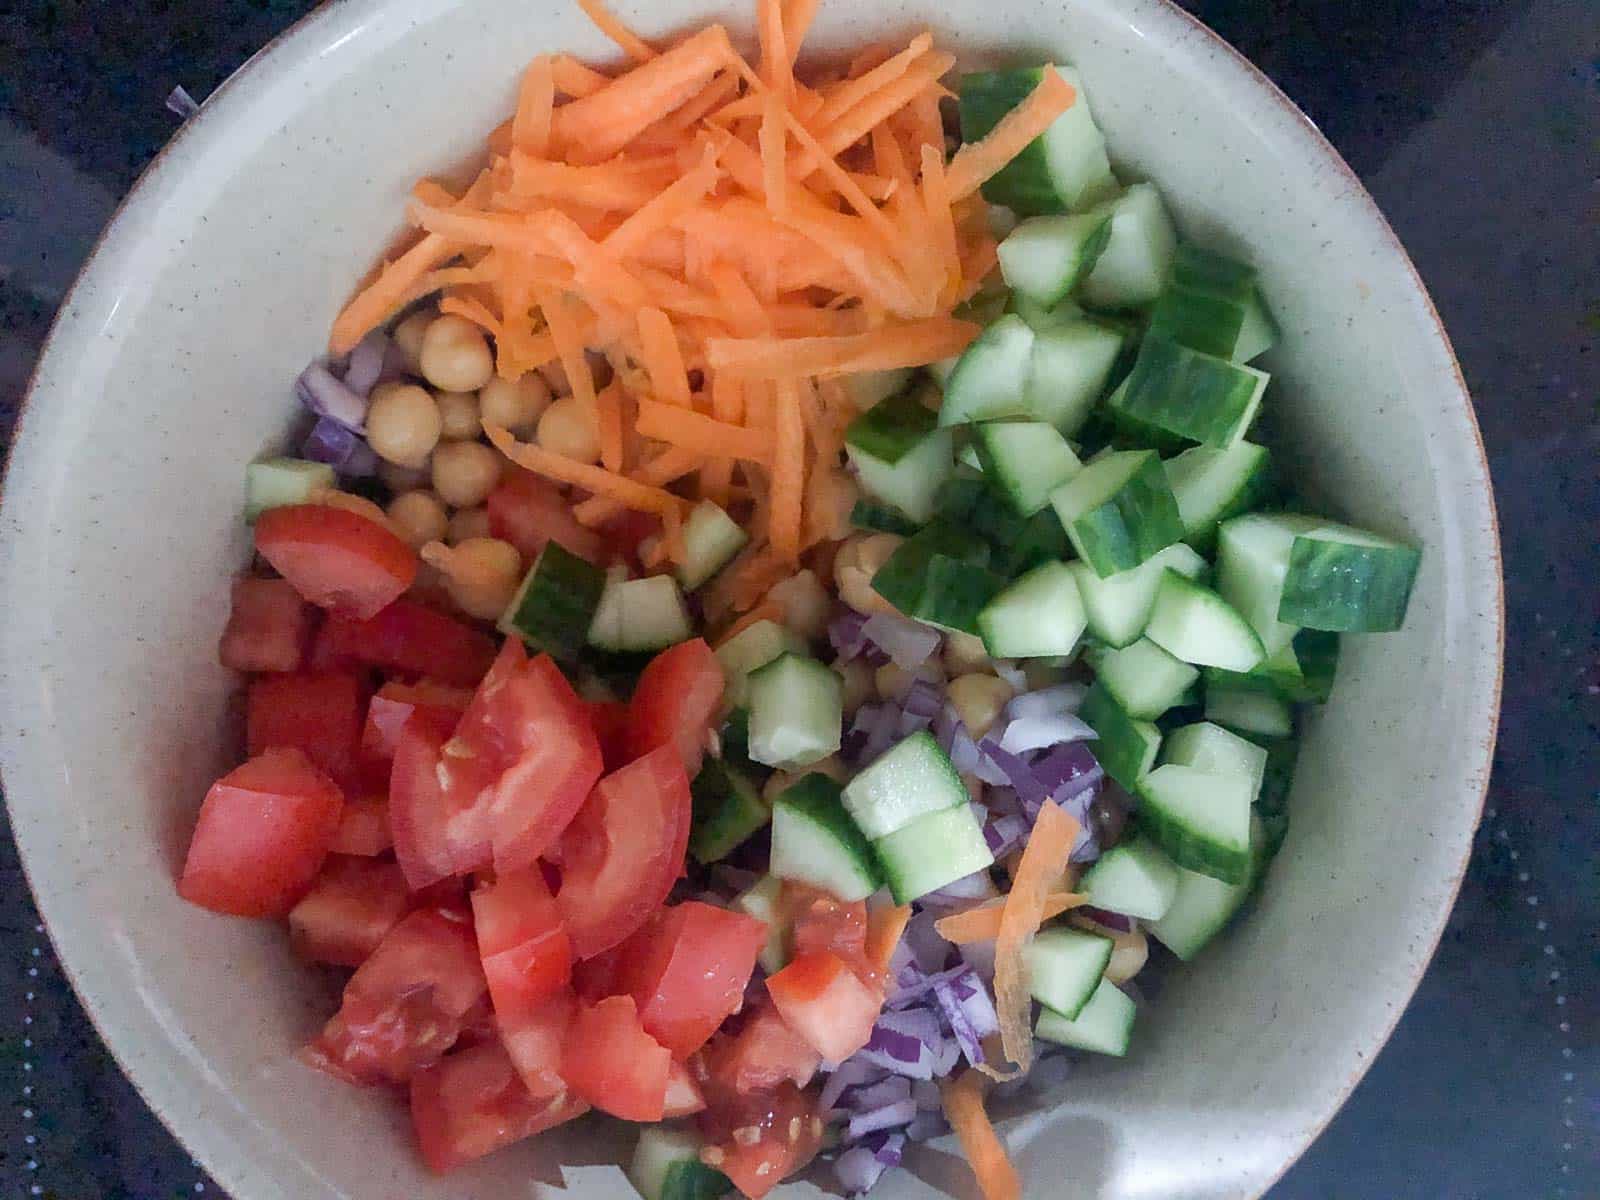 Diced tomatoes, cucumber, grated carrot, chickpeas and red onion in a bowl.